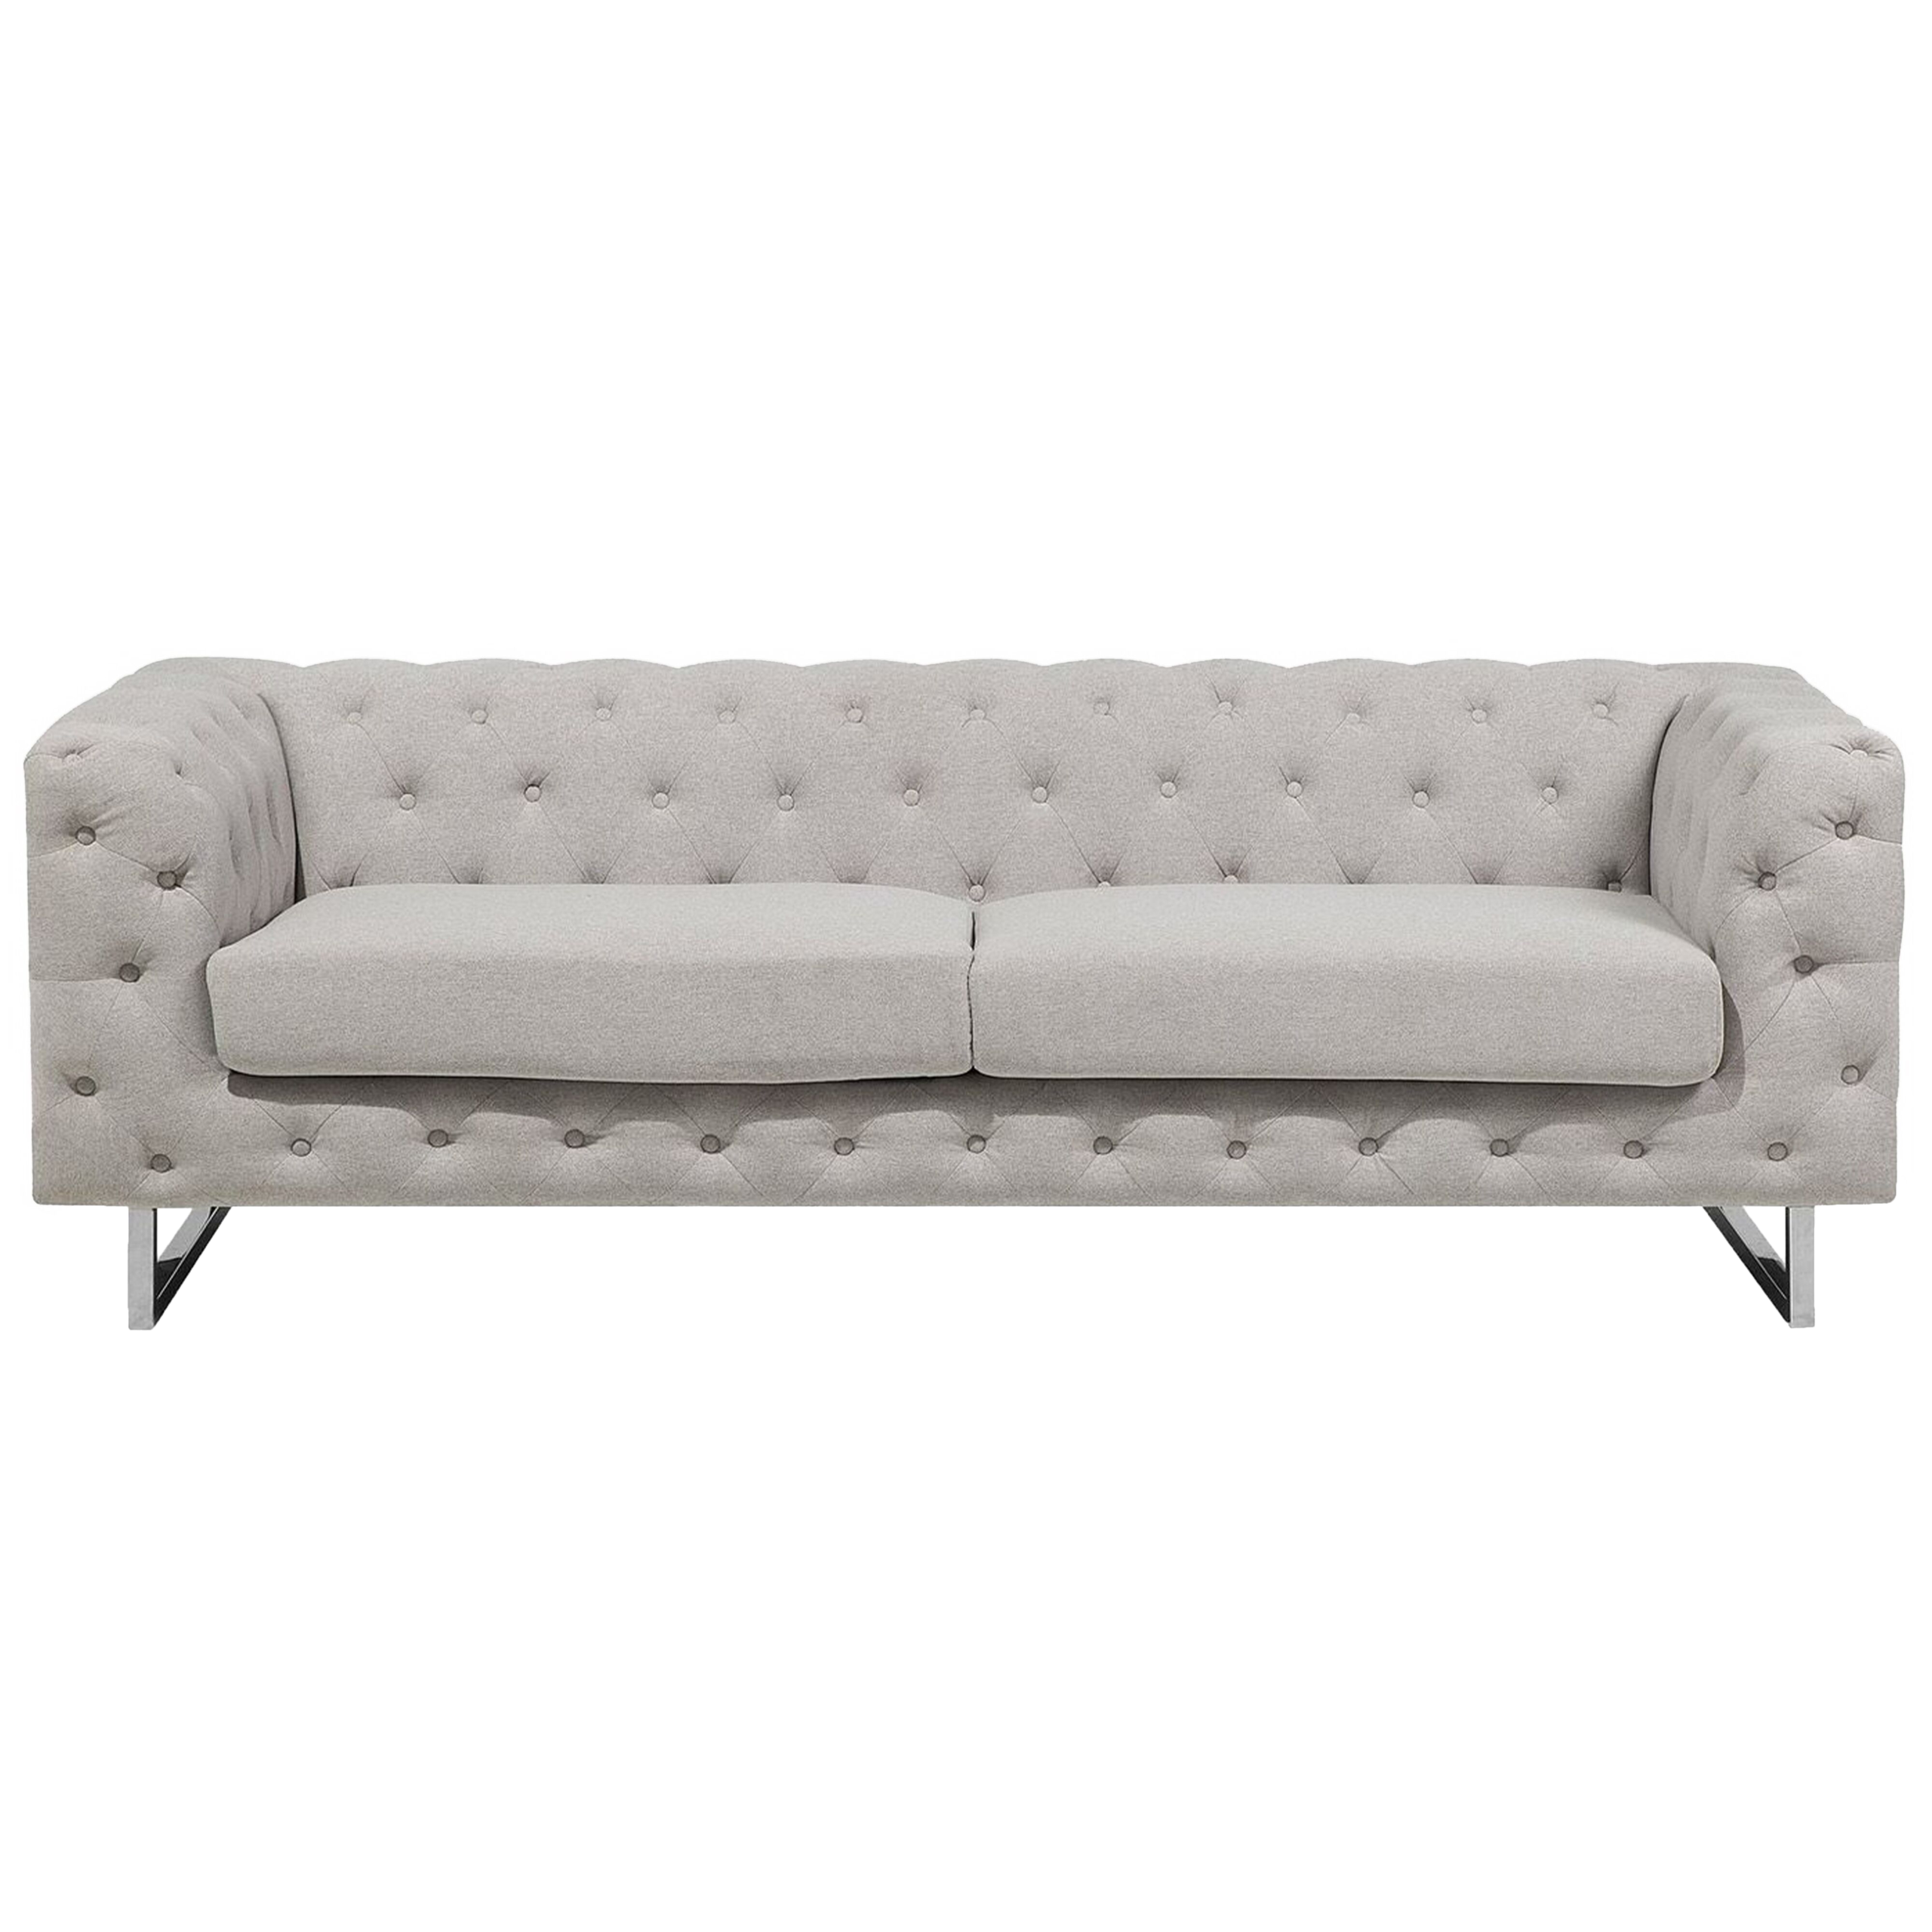 Beliani 3 Seater Chesterfield Sofa Beige Ivory Button Tufted